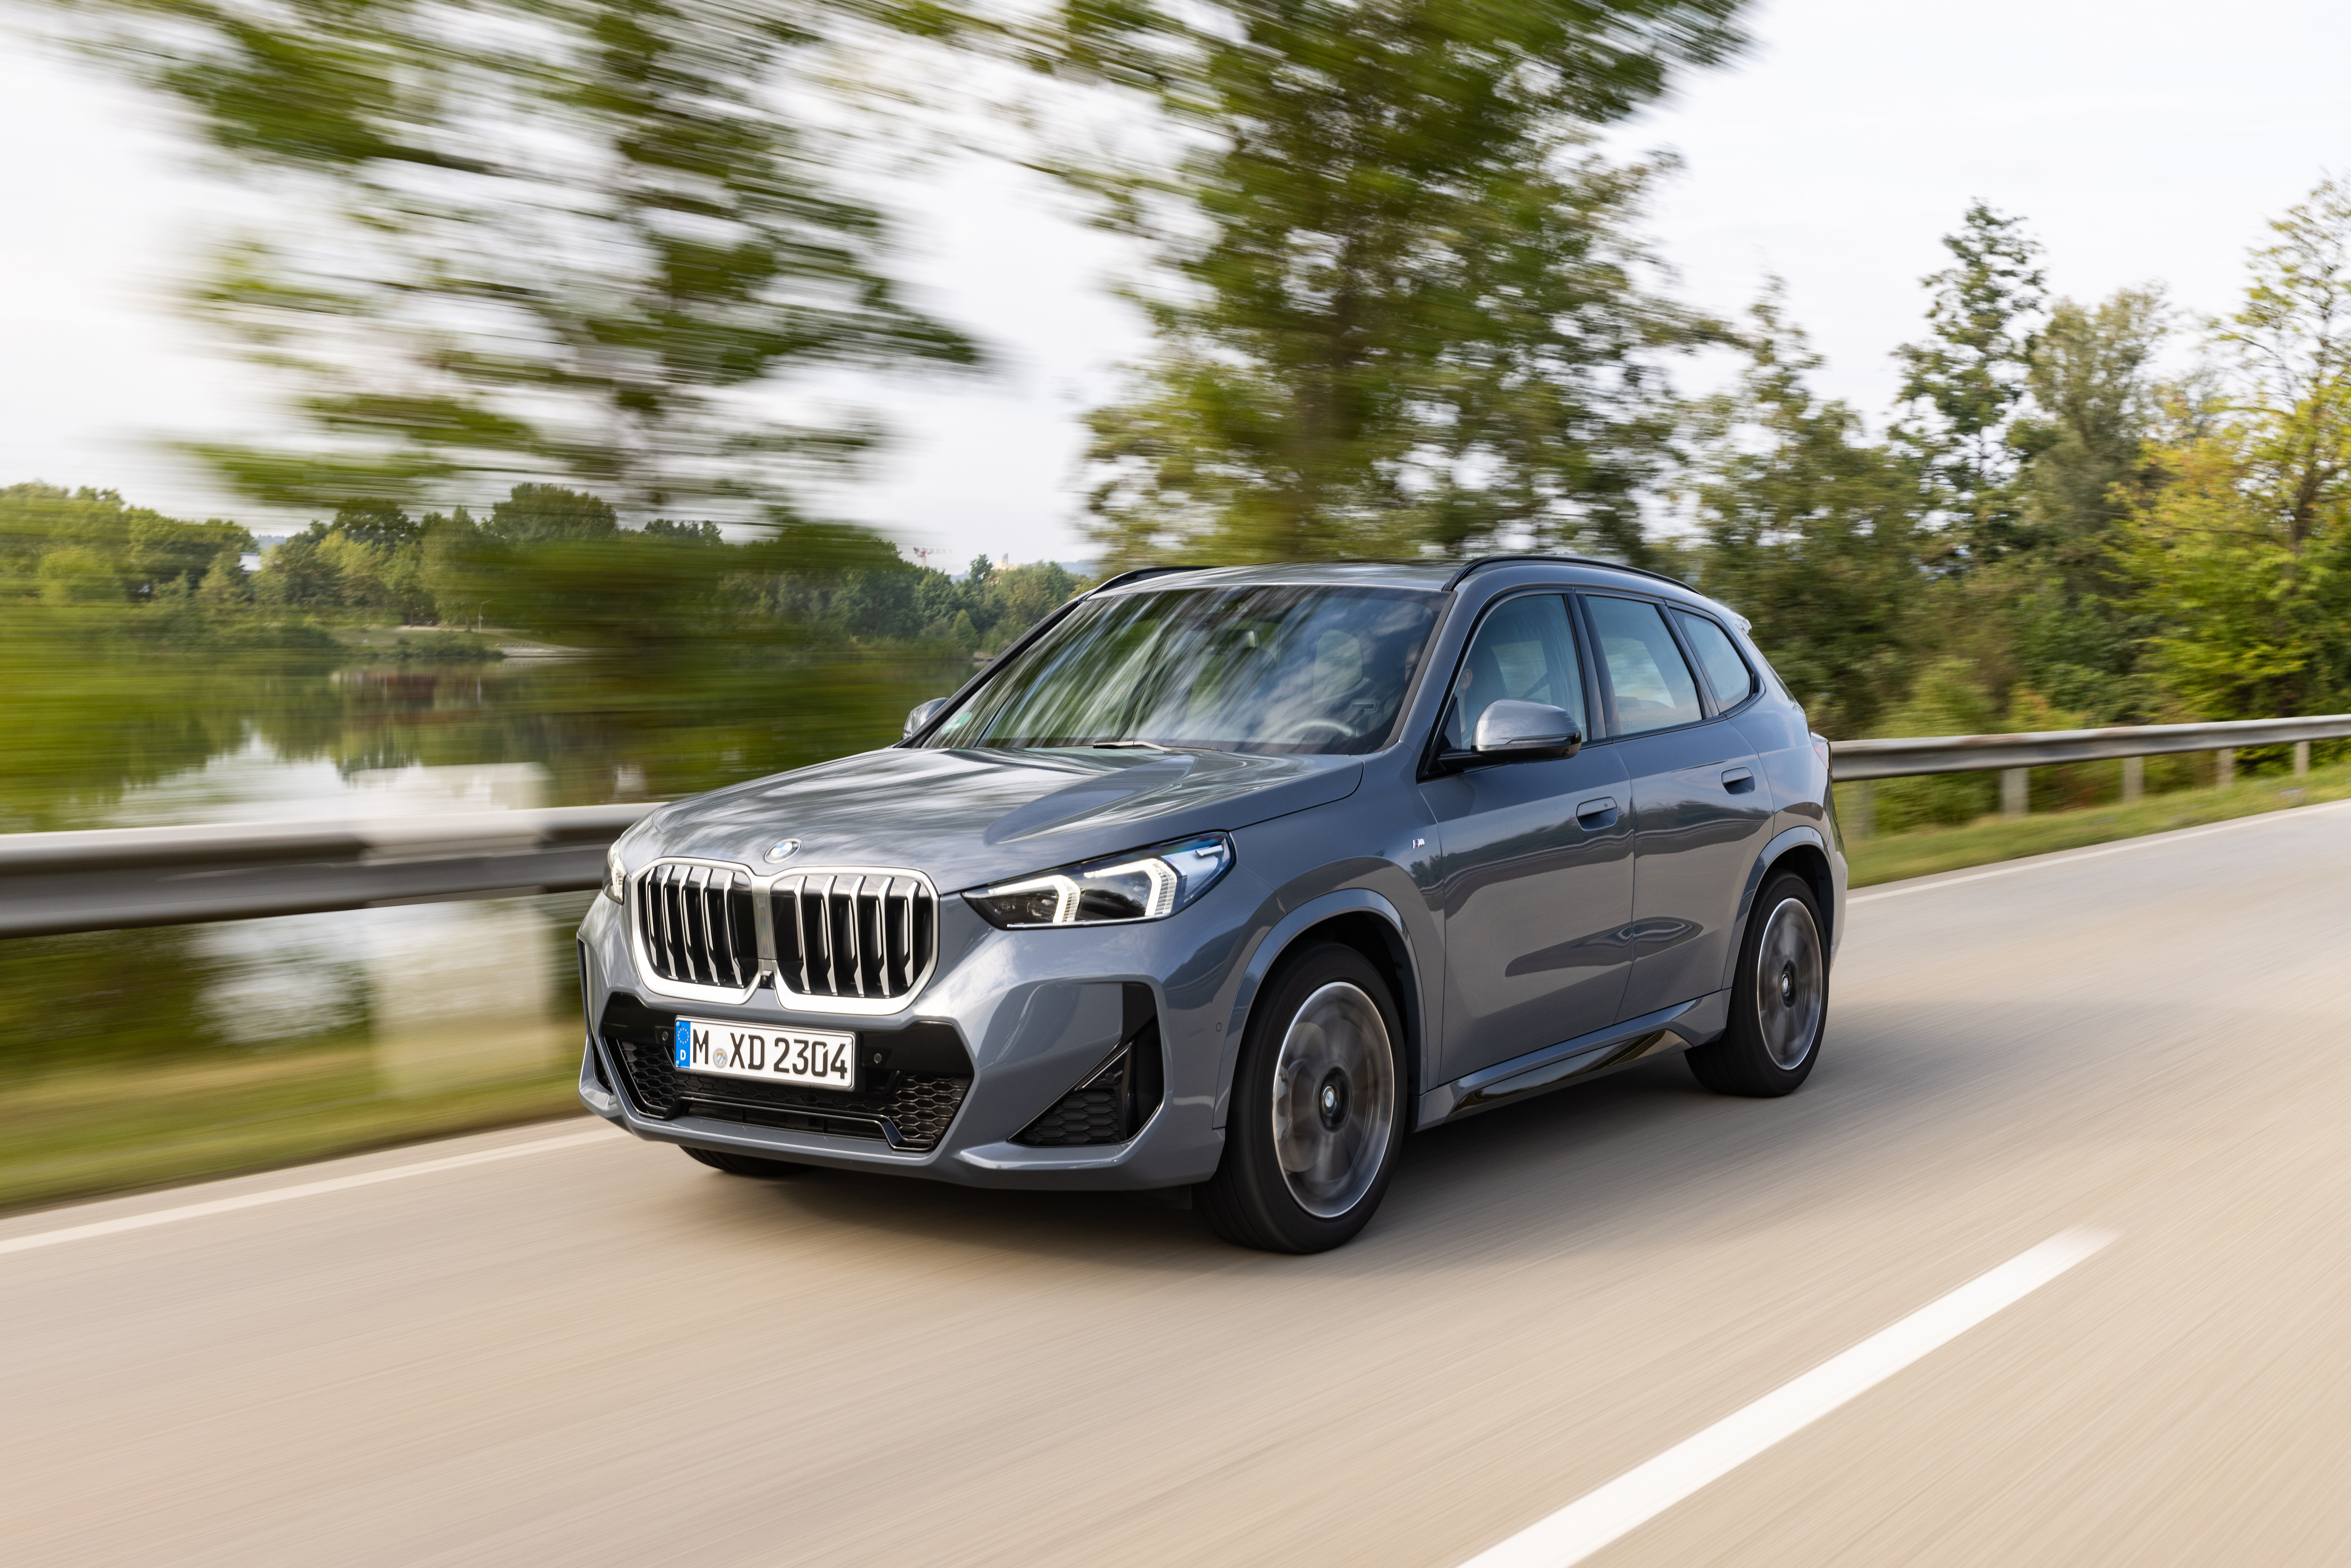 The all-new BMW X1 - Additional images.